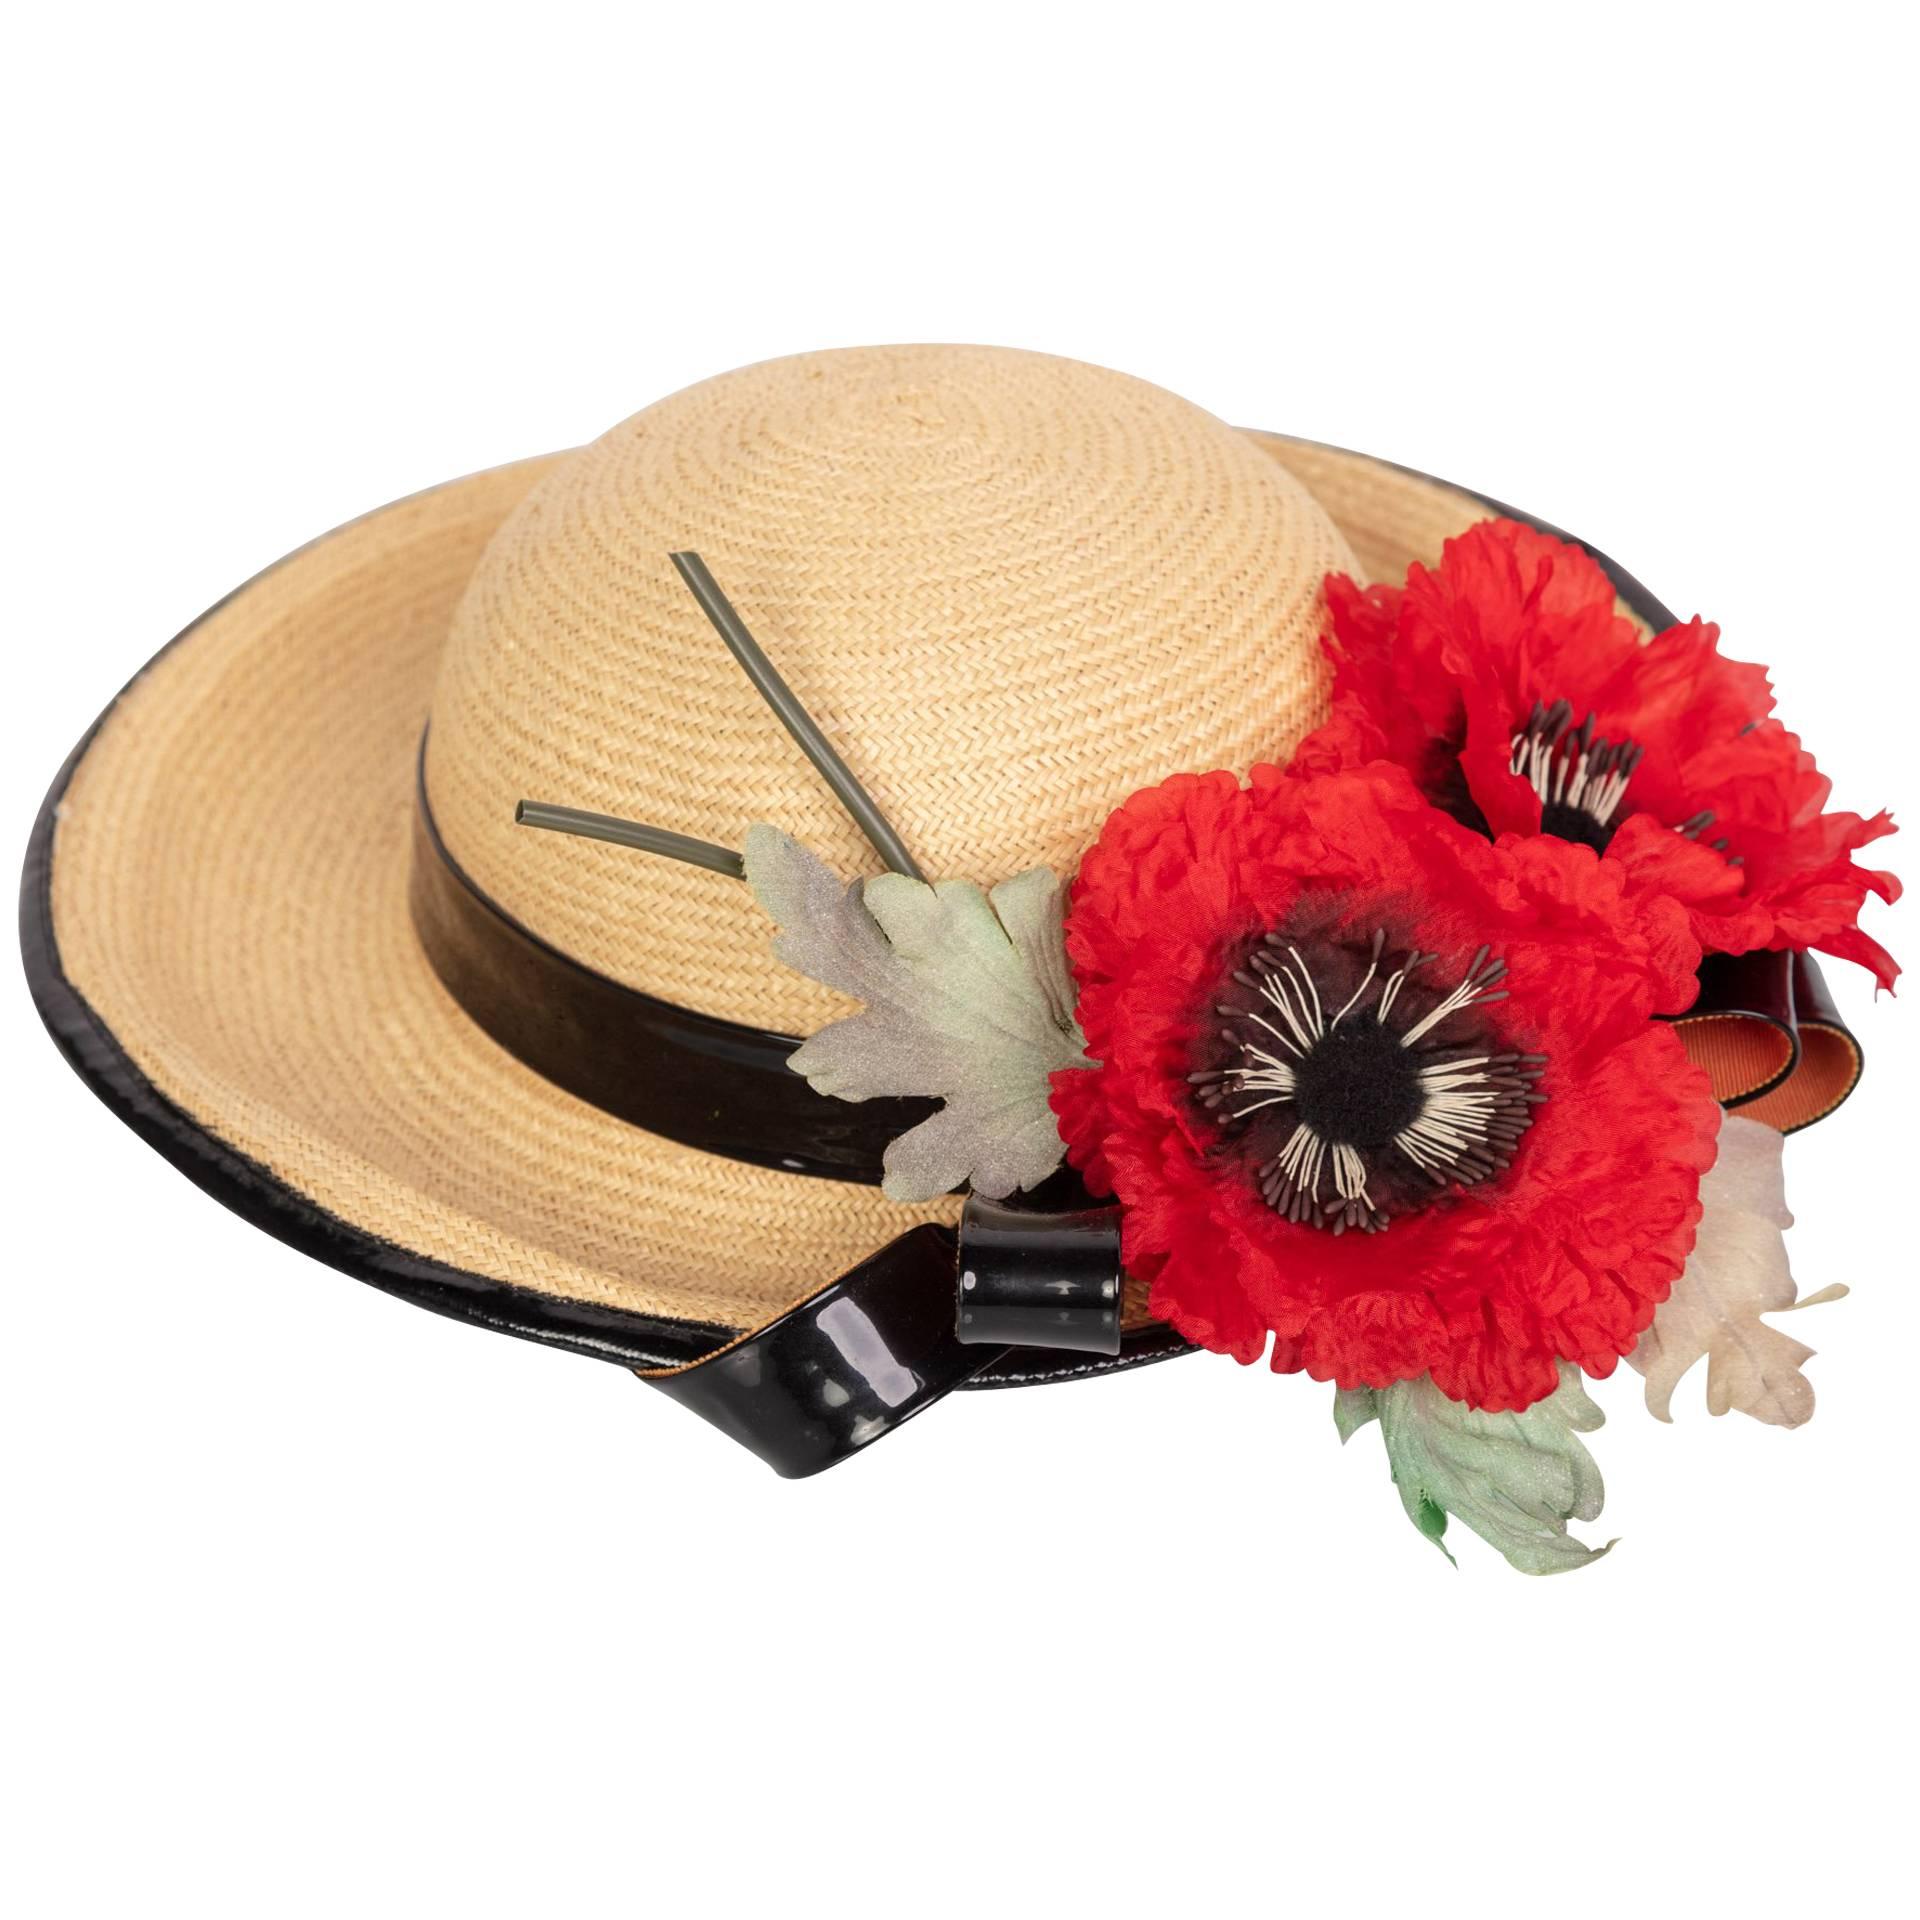 Yves Saint Laurent Straw and Black Patent Leather Red Poppy Flower Hat, 1970s 